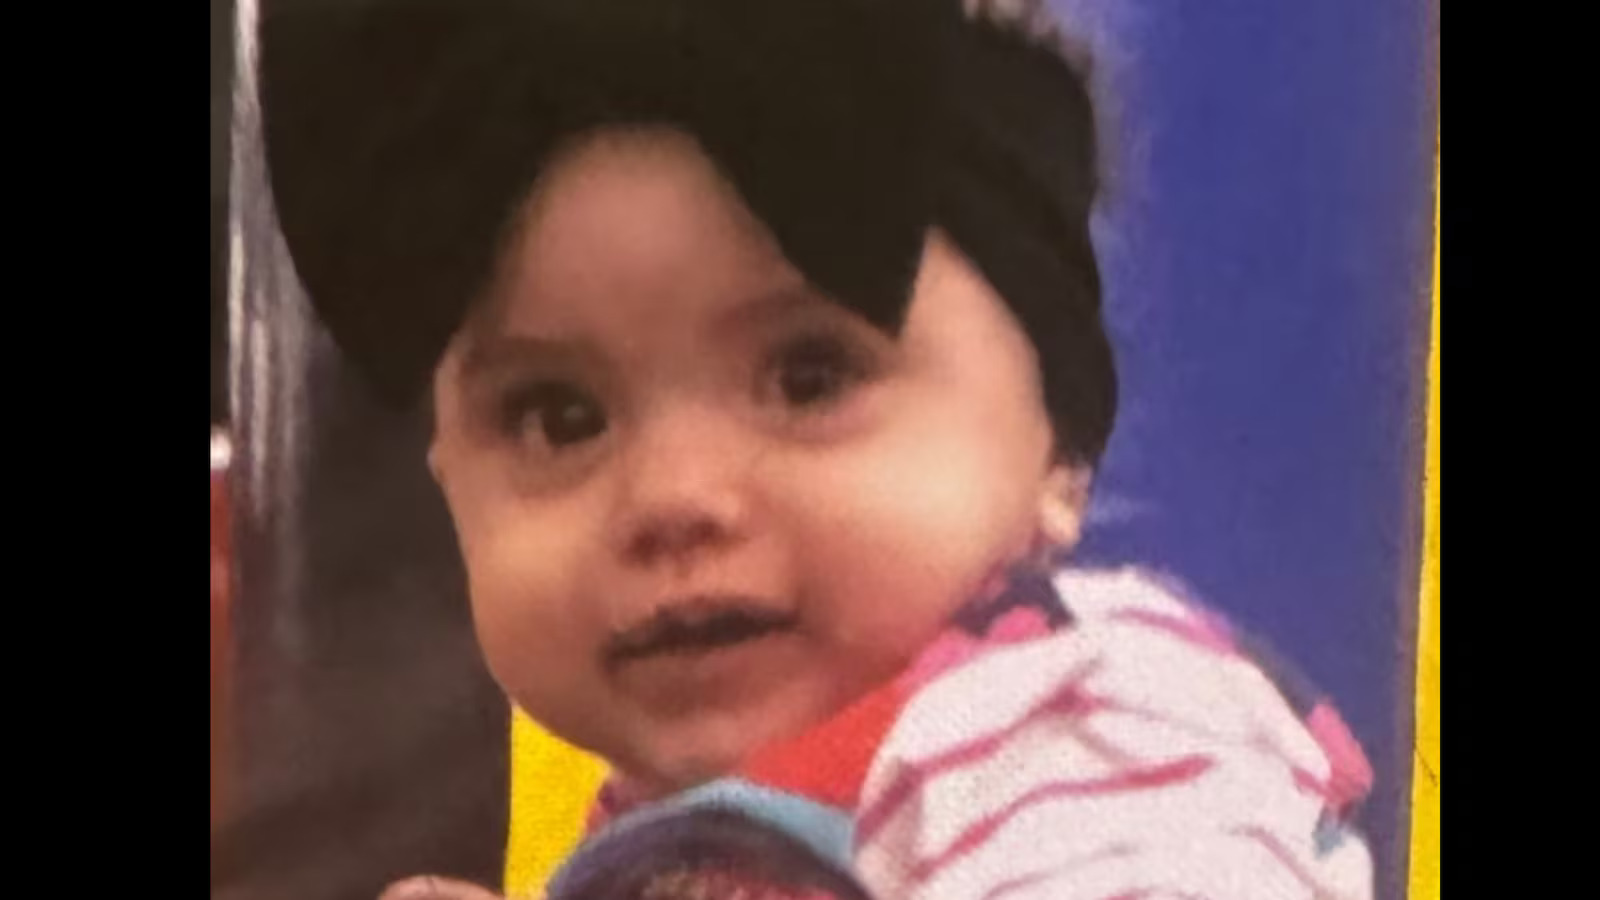 Amber Alert: A 10-month girl is missing or probably abducted 